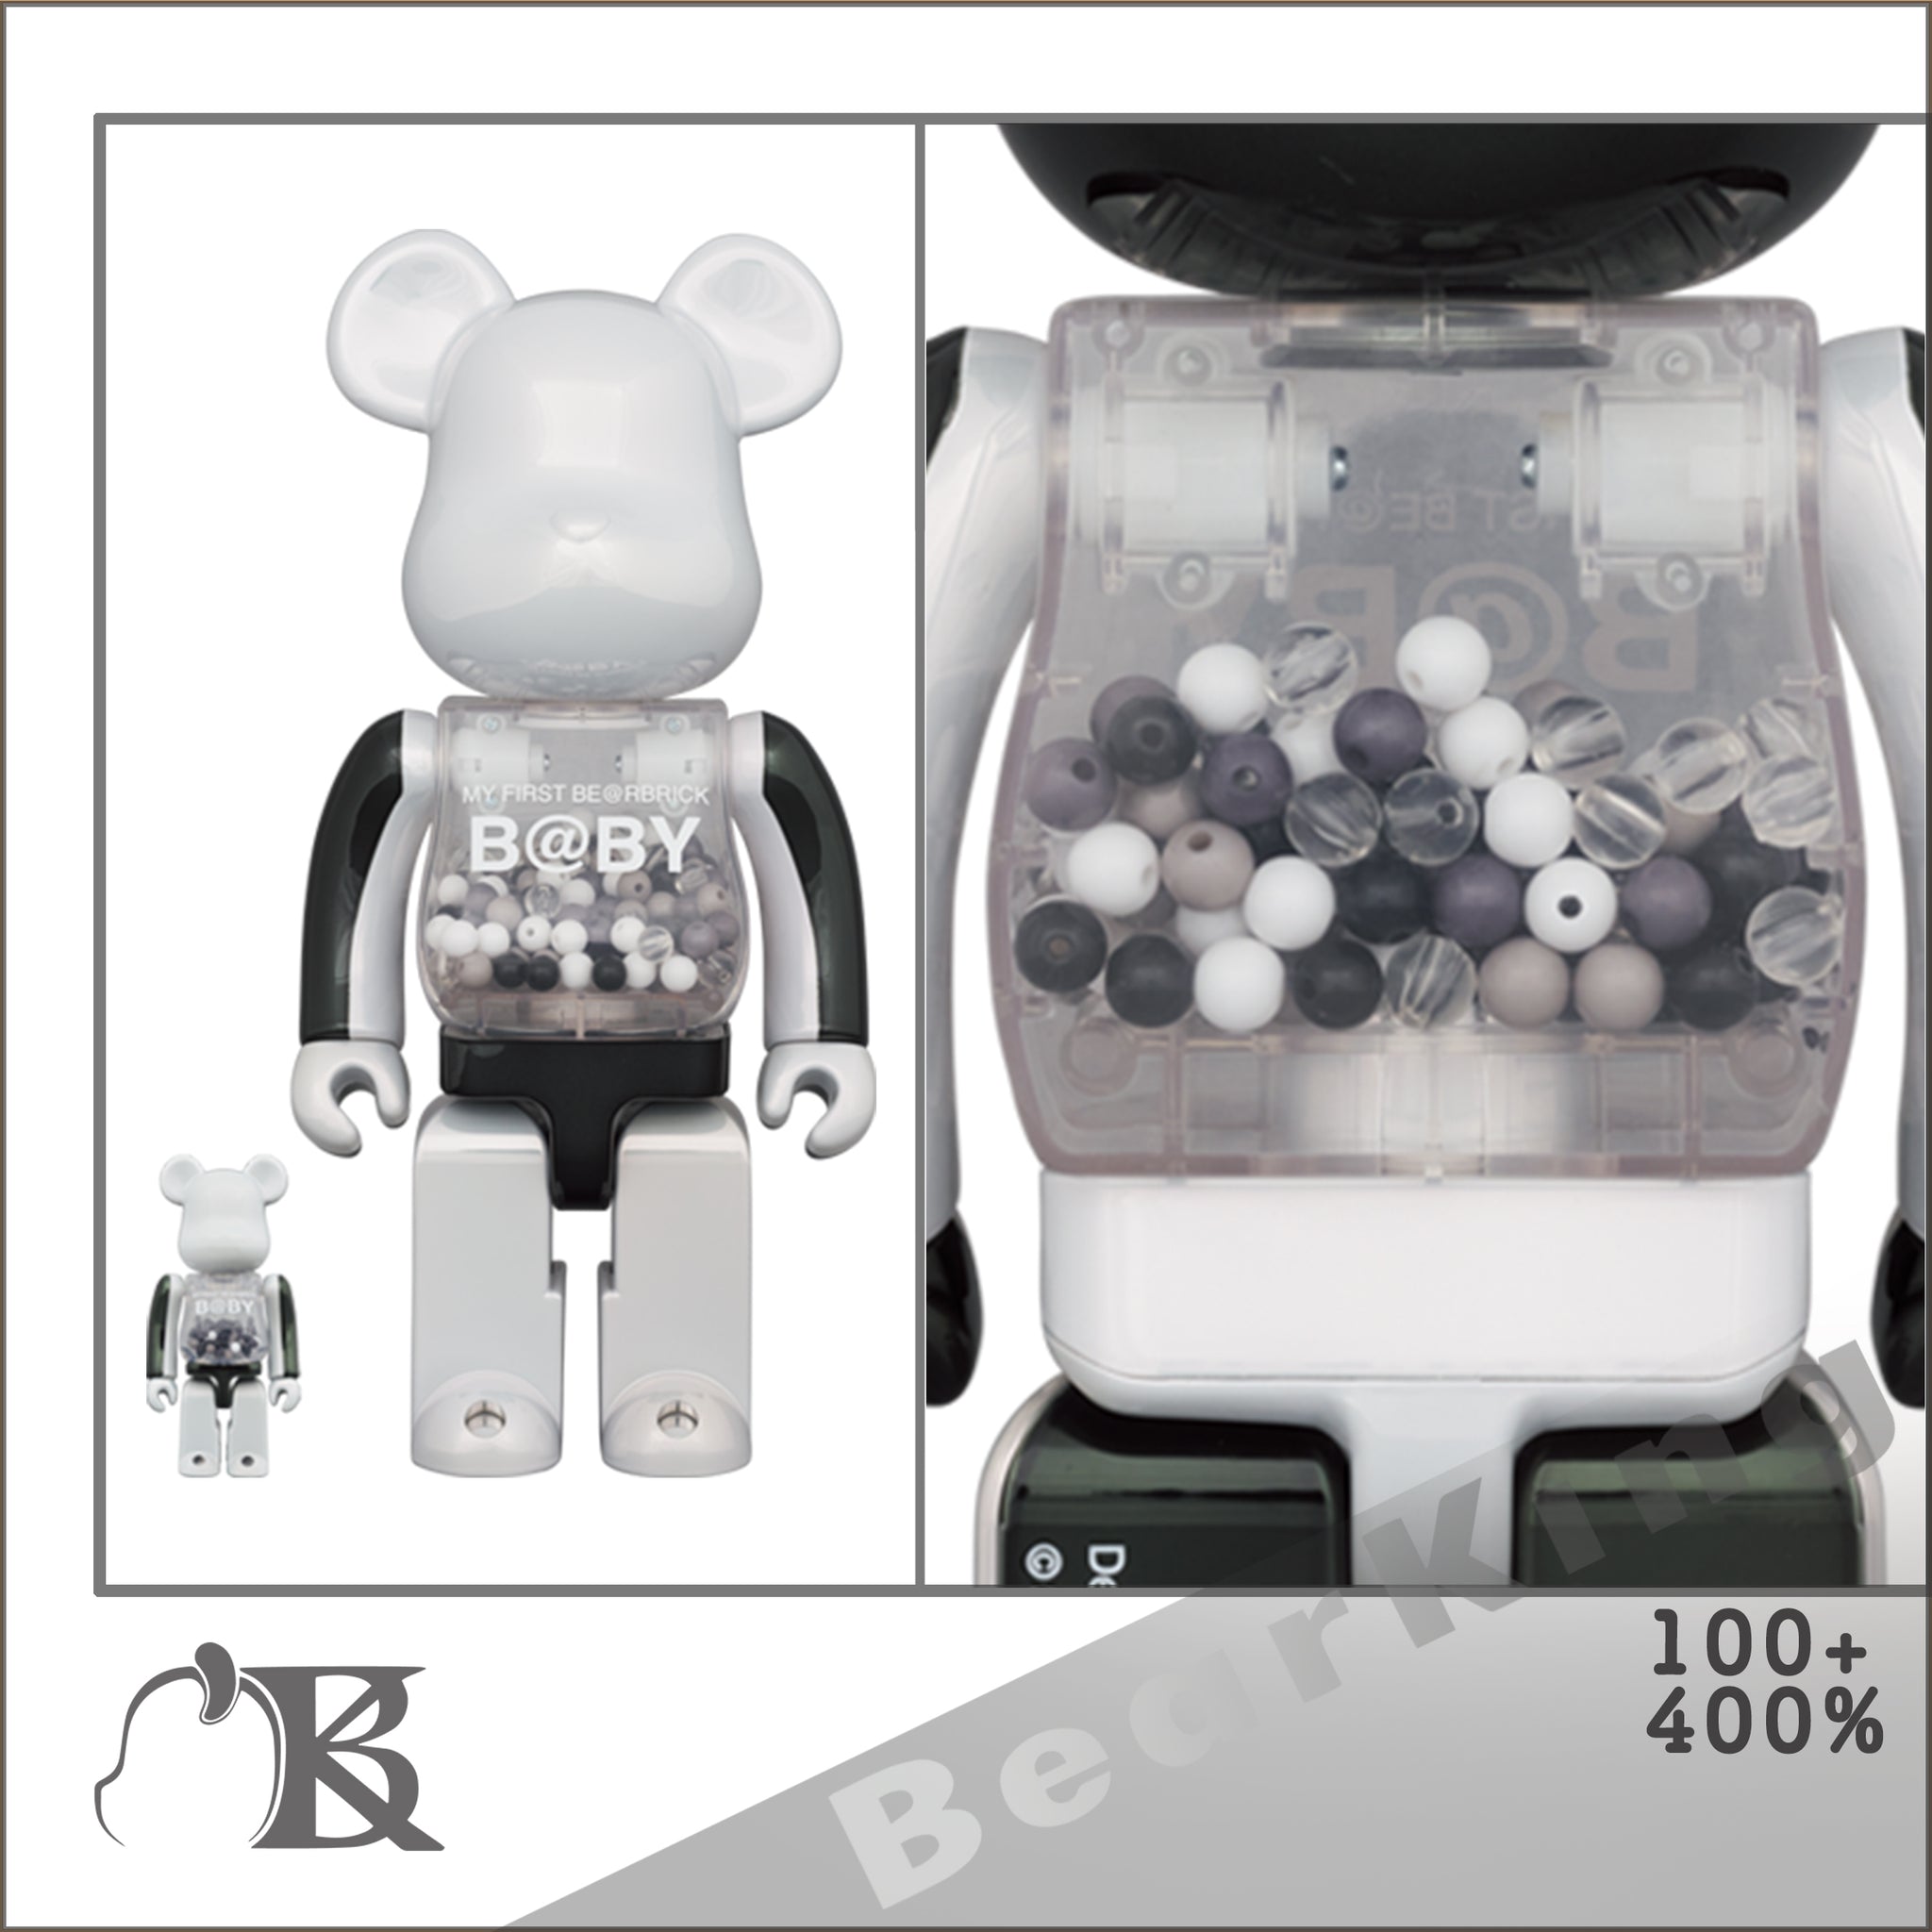 BE@RBRICK B@BY BLACK & WHITE 400 100その他